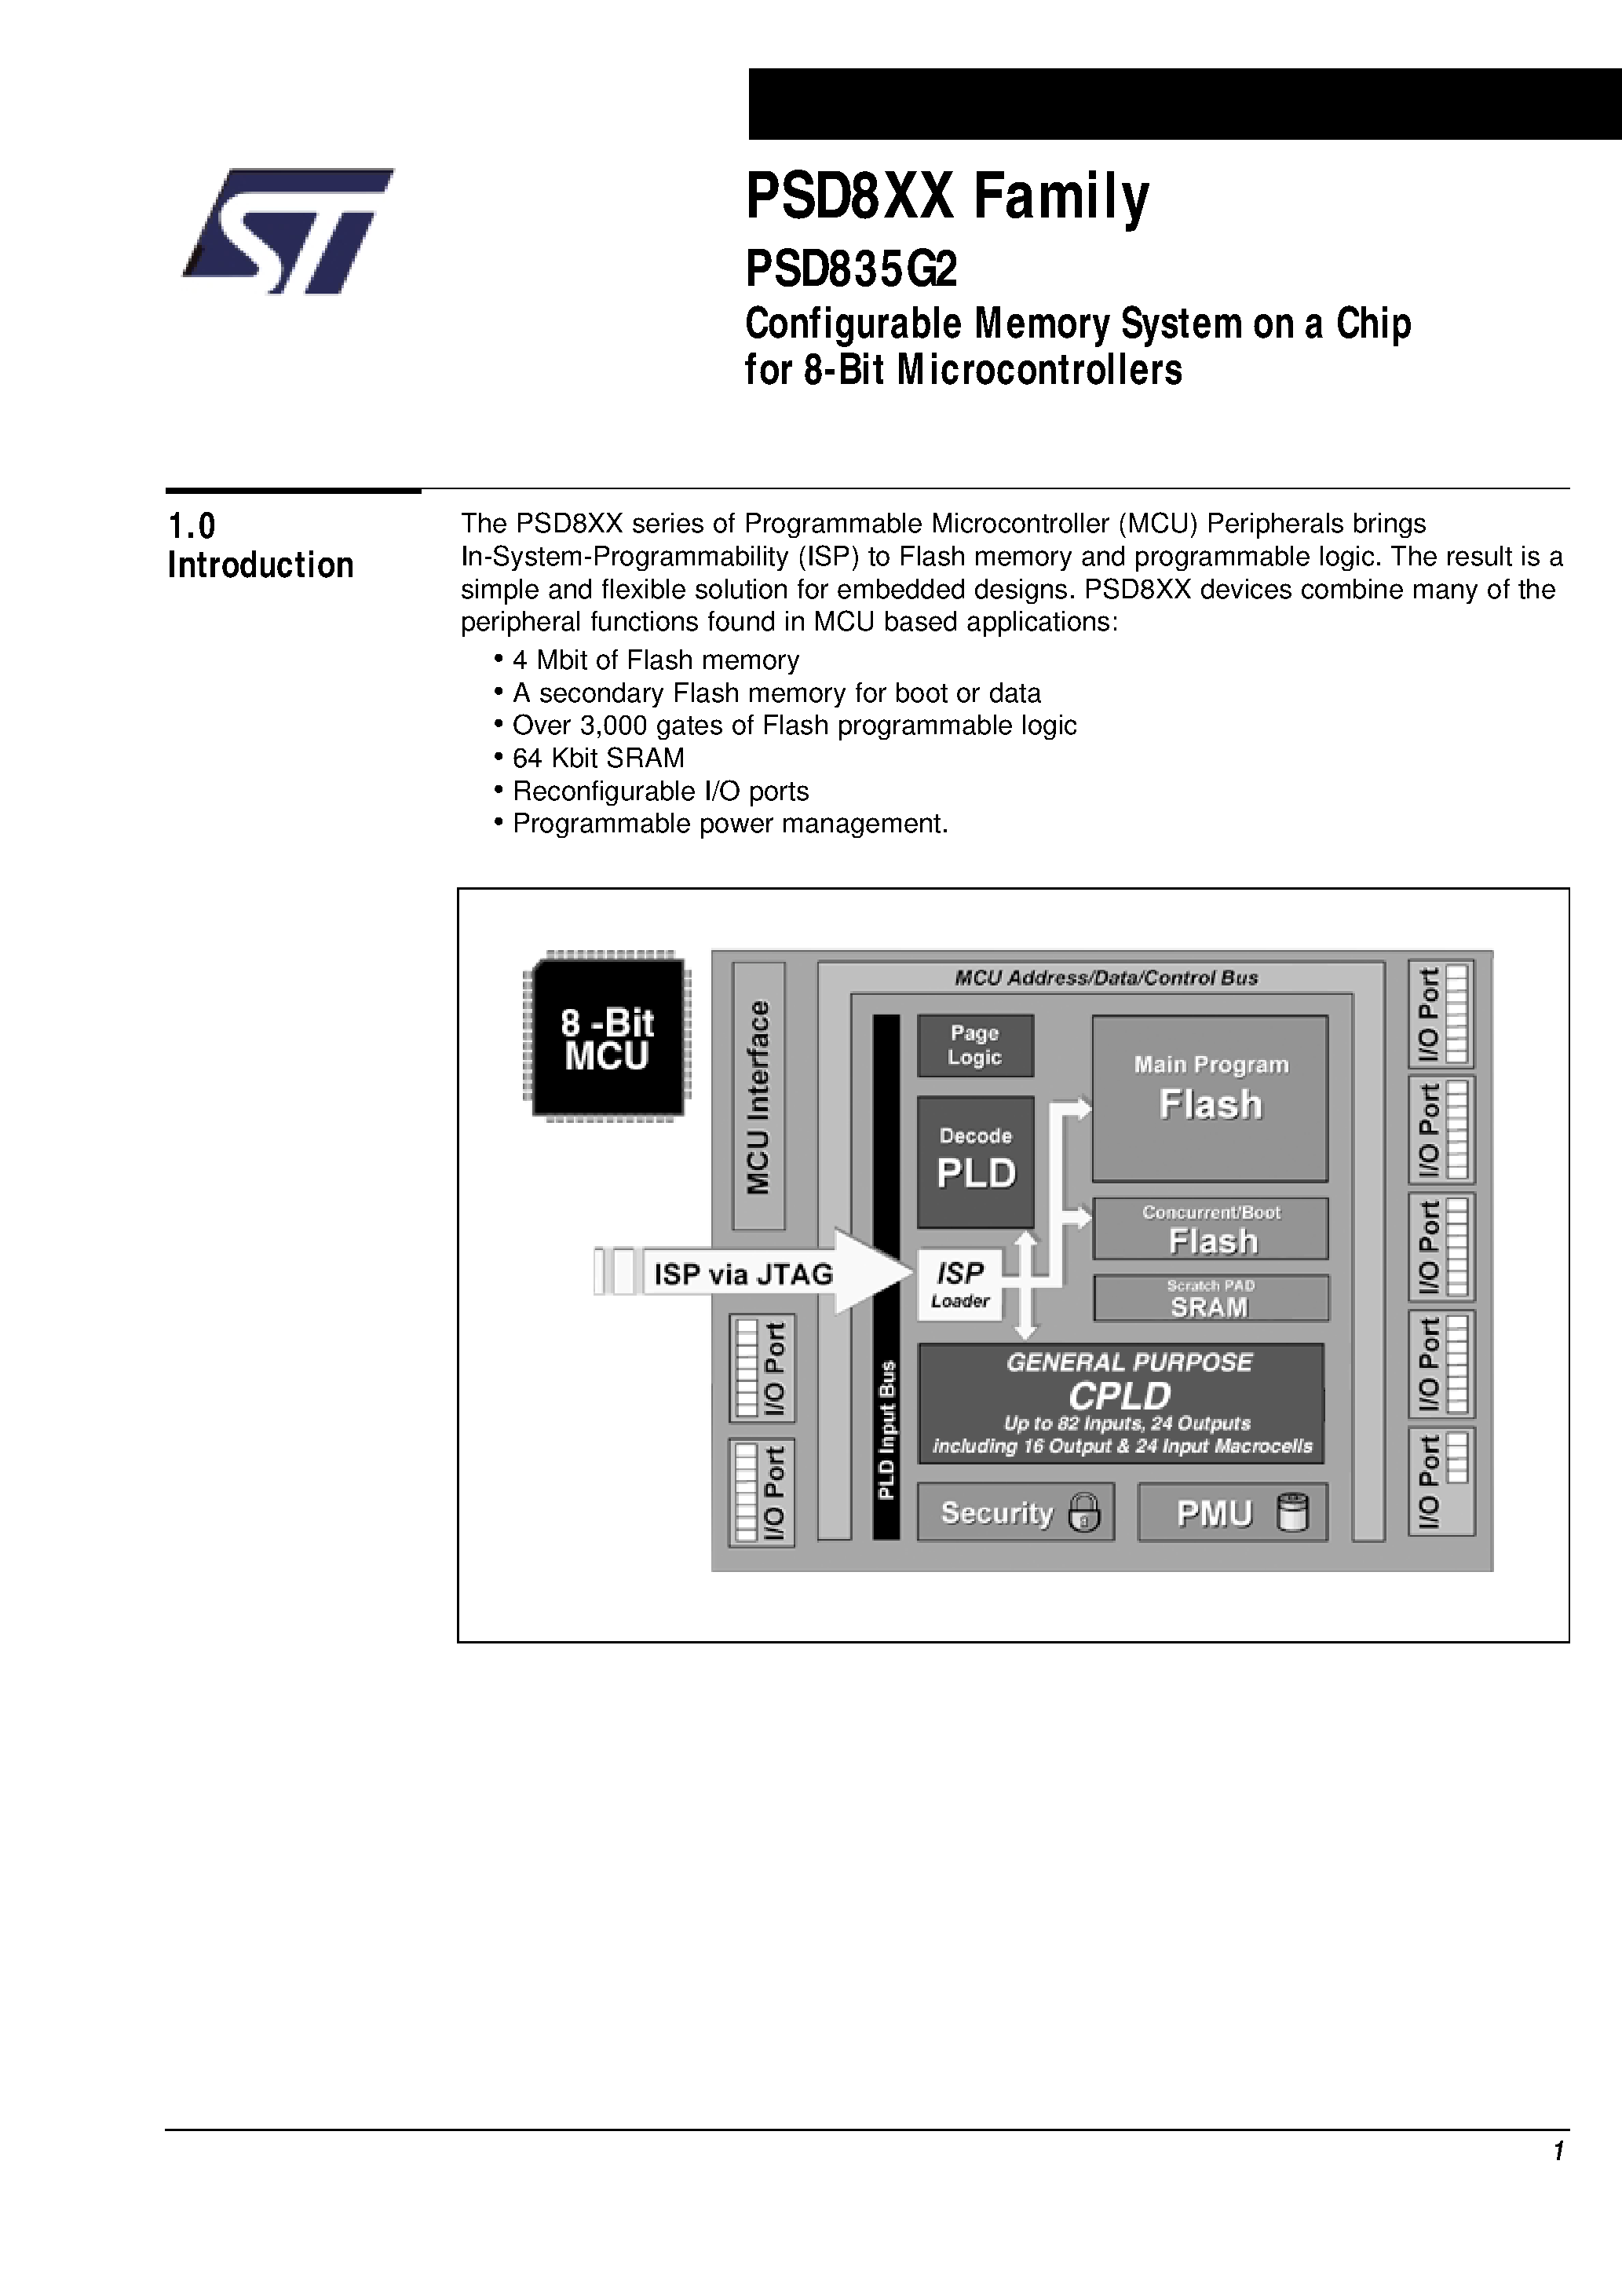 Datasheet PSD835F1-A-15UI - Configurable Memory System on a Chip for 8-Bit Microcontrollers page 2